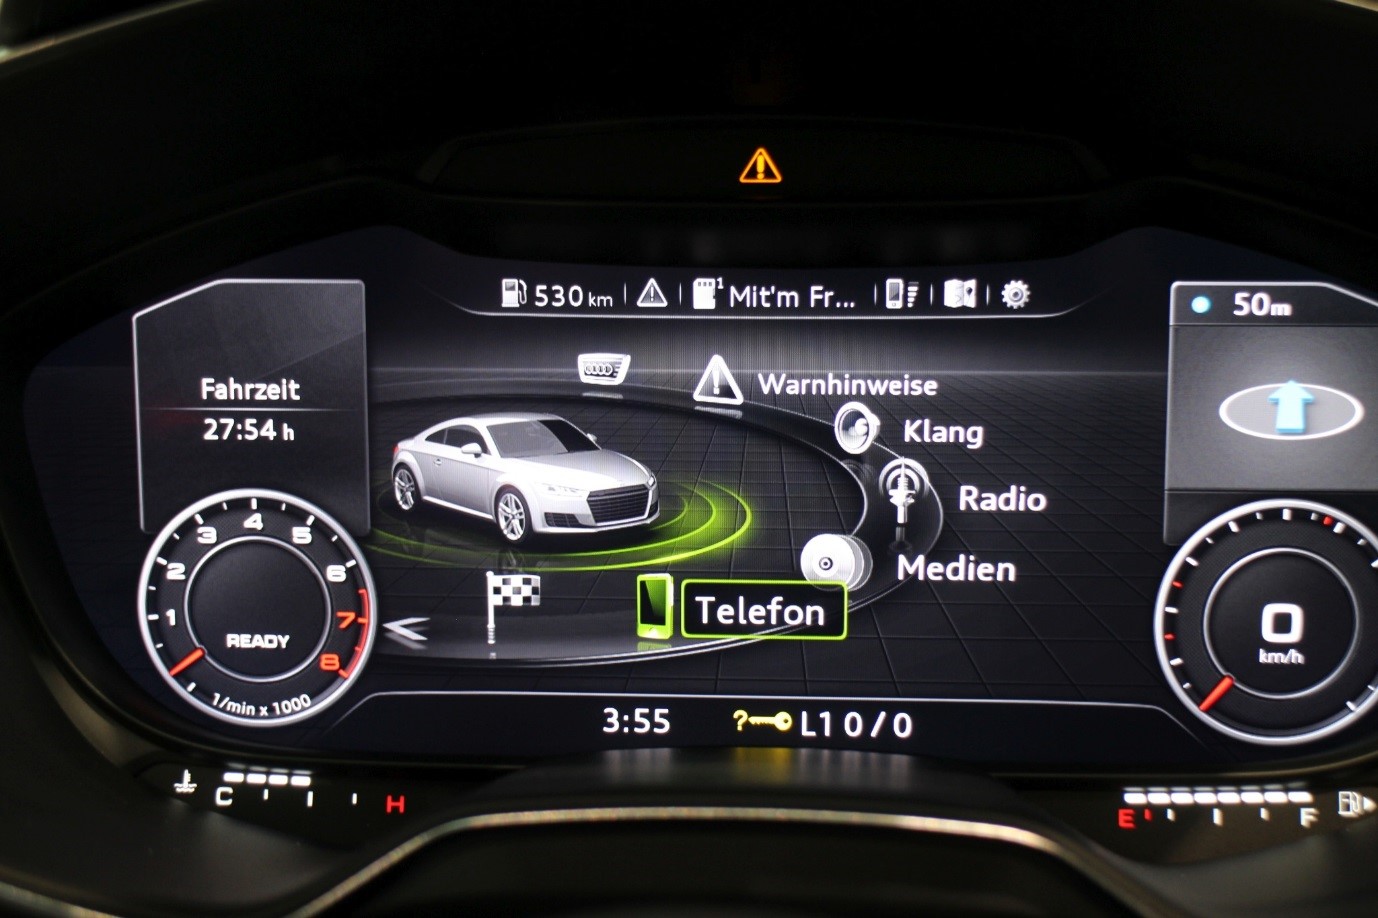 the virtual instrument cluster in a 2014 Audi TT. NOR Flash is widely used to enable instant display of essential cluster information at start-up. (Image credit: Robert Basic under Creative Commons licence.)